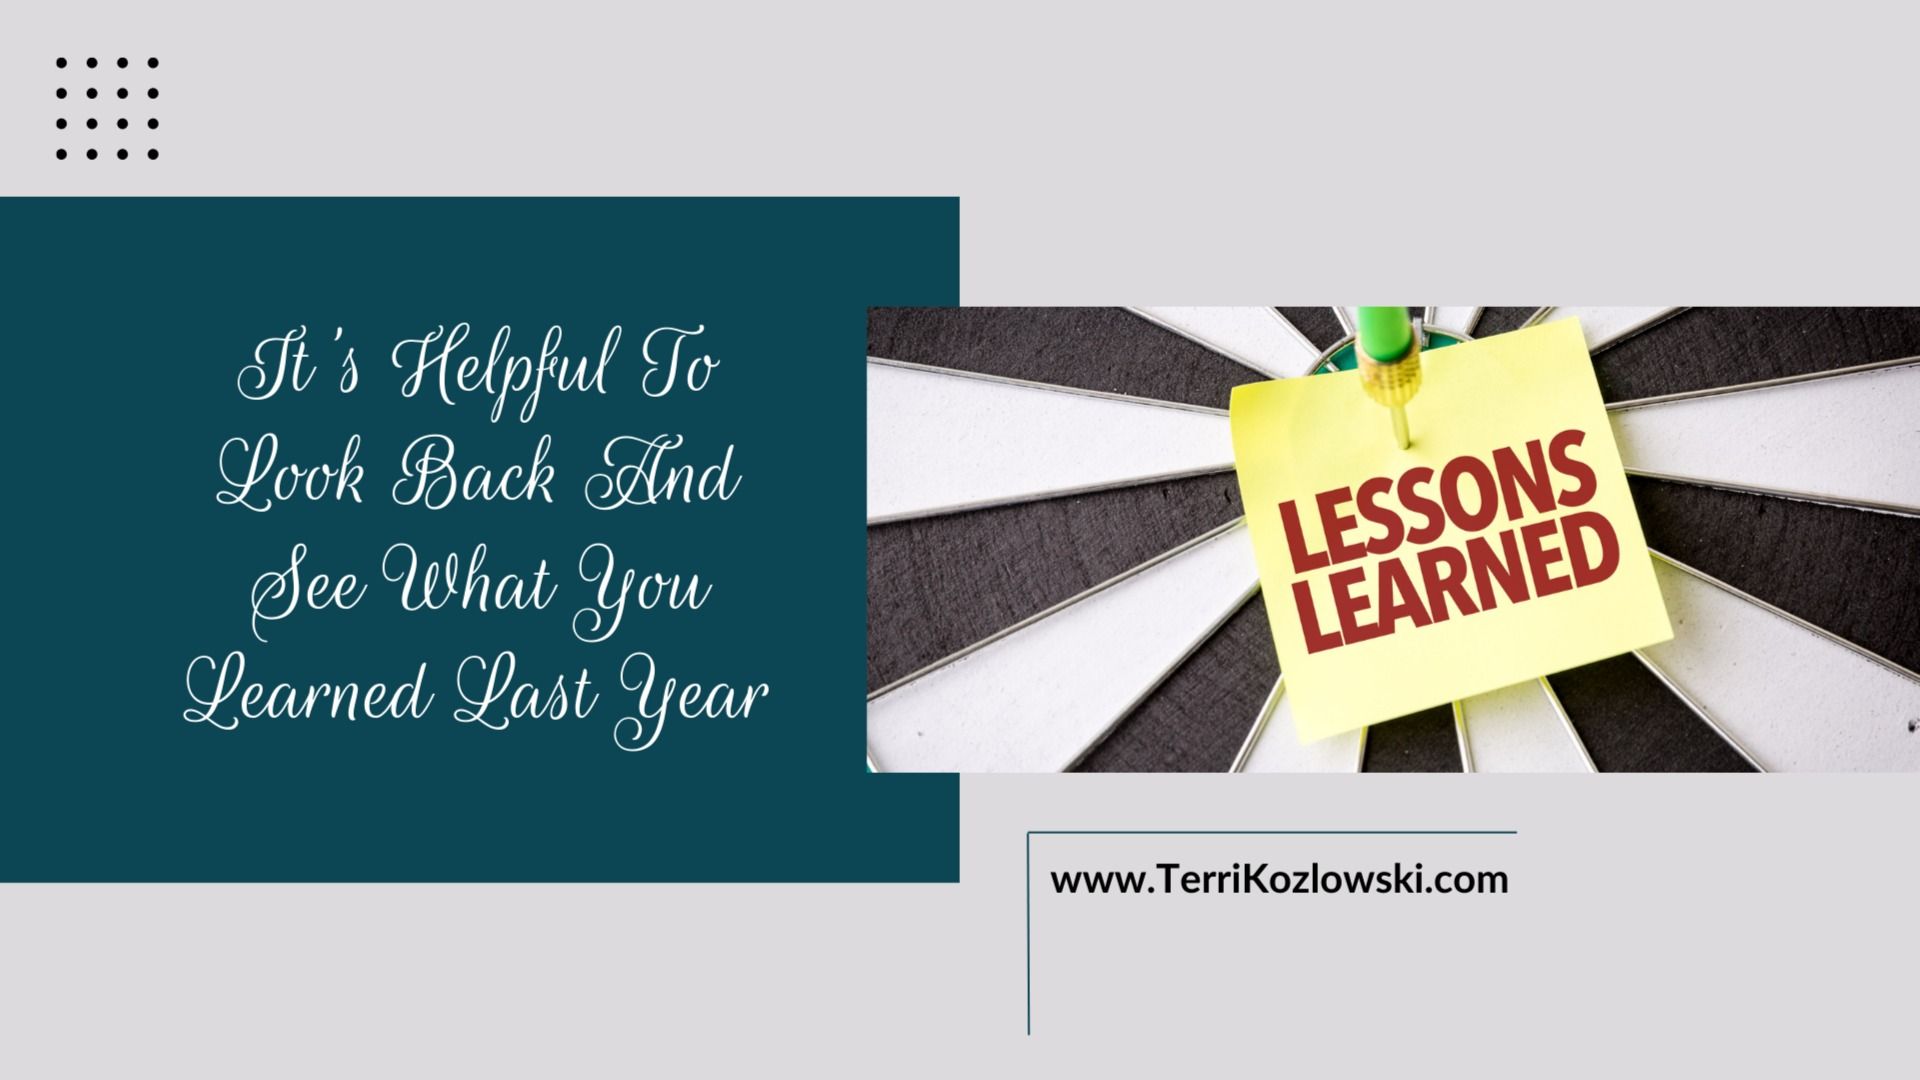 It's Helpful To Take Time And Look Back To See How Much You’ve Grown | By TERRI MARIE KOZLOWSKI | Tealfeed